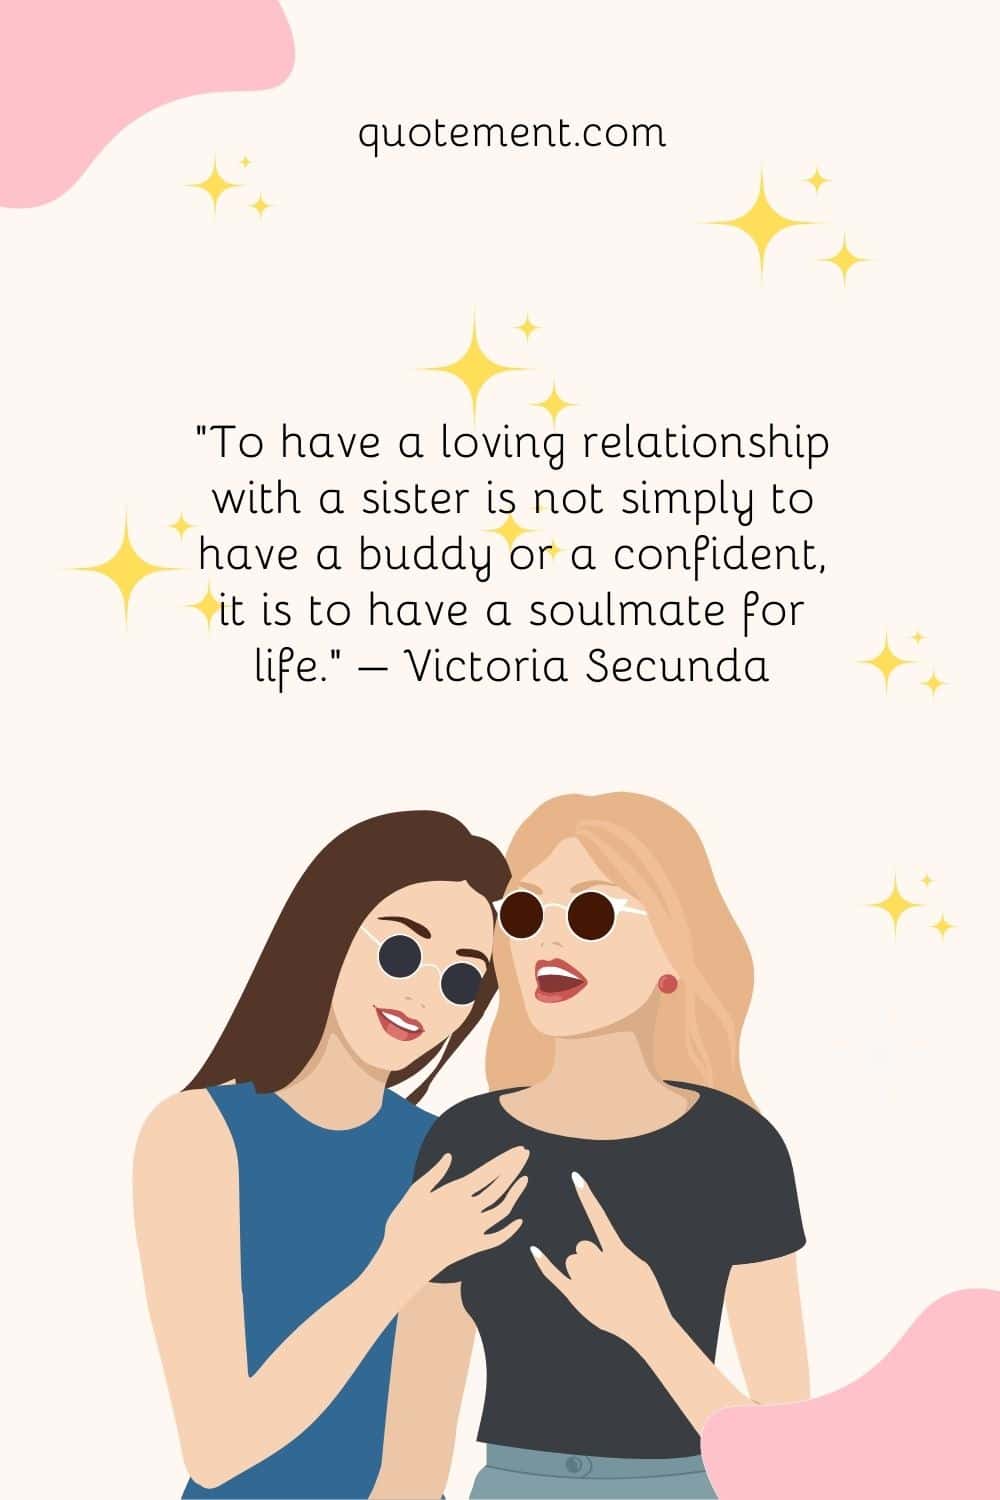 “To have a loving relationship with a sister is not simply to have a buddy or a confident, it is to have a soulmate for life.” – Victoria Secunda